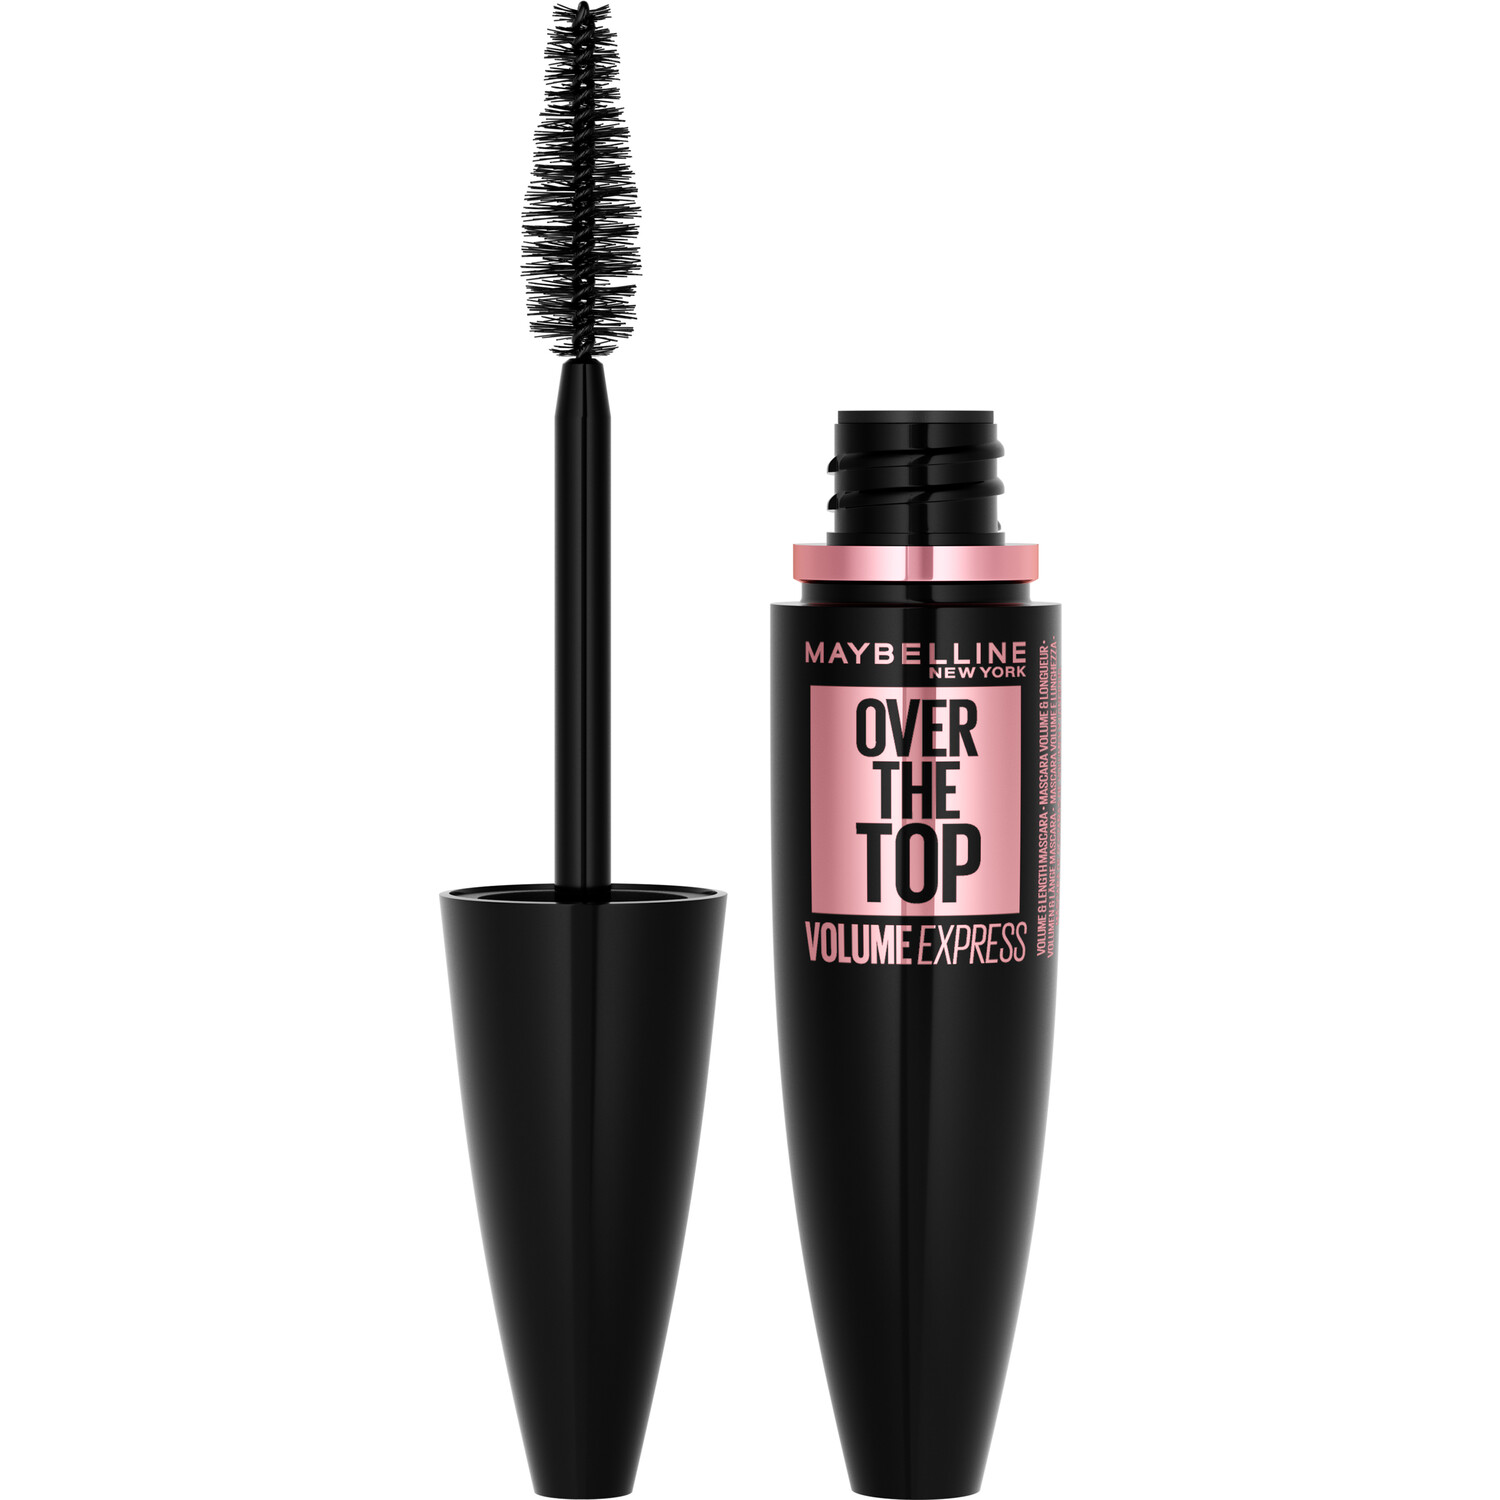 Maybelline Over The Top Volume Express Mascara - Black Image 2